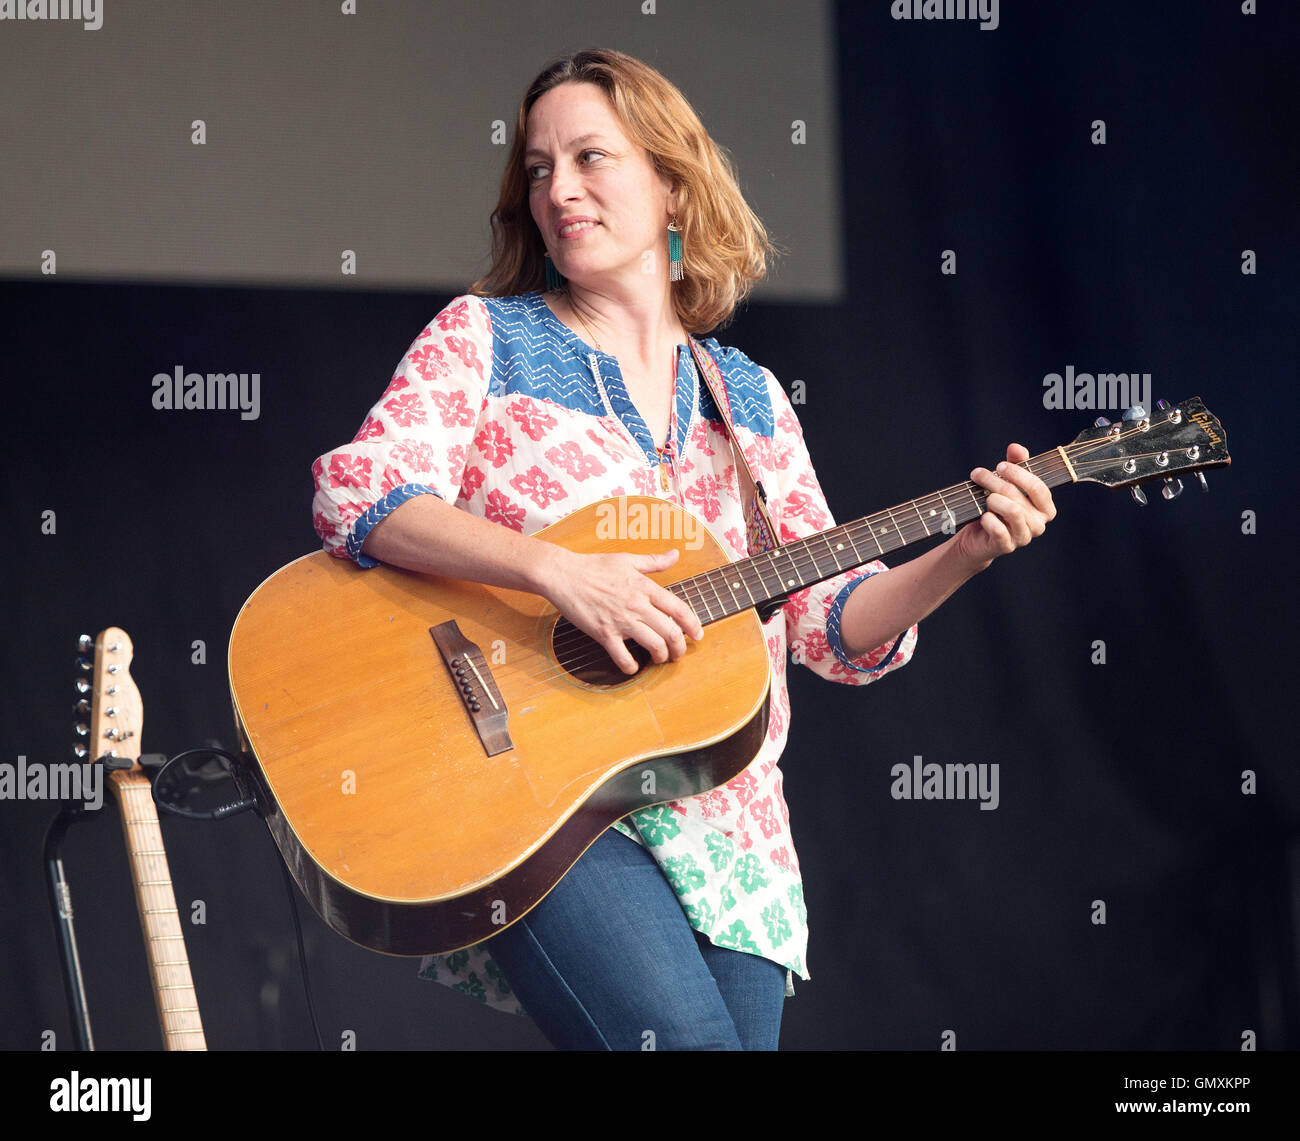 Independent recording artist and singer Sarah Harmer in concert at the Whistler Olympic Plaza.  Whistler BC, Canada Stock Photo